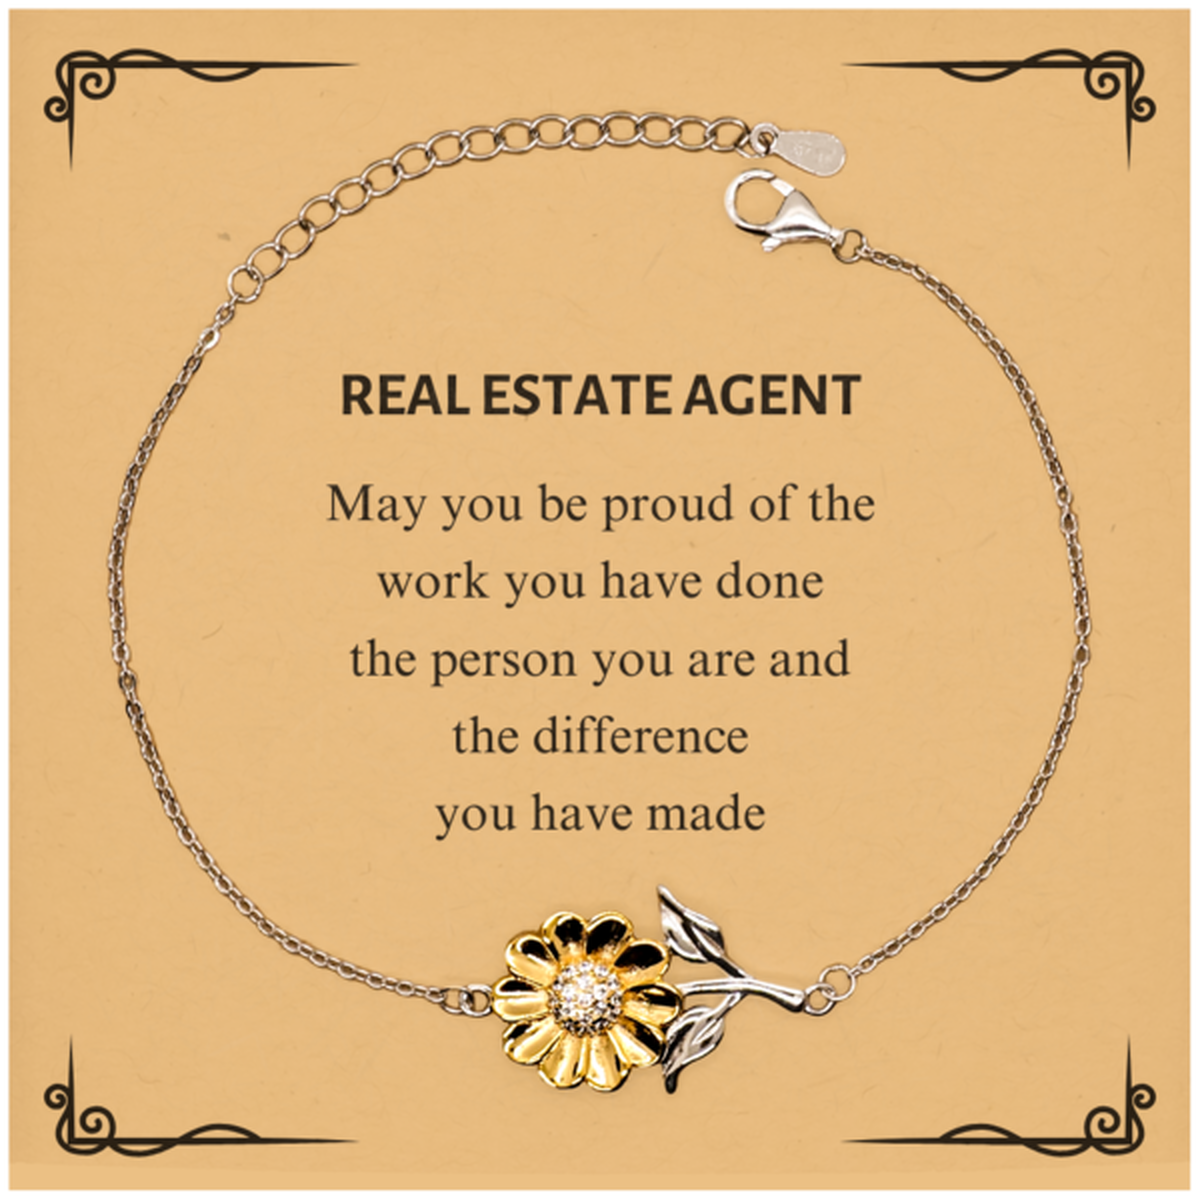 Real Estate Agent May you be proud of the work you have done, Retirement Real Estate Agent Sunflower Bracelet for Colleague Appreciation Gifts Amazing for Real Estate Agent